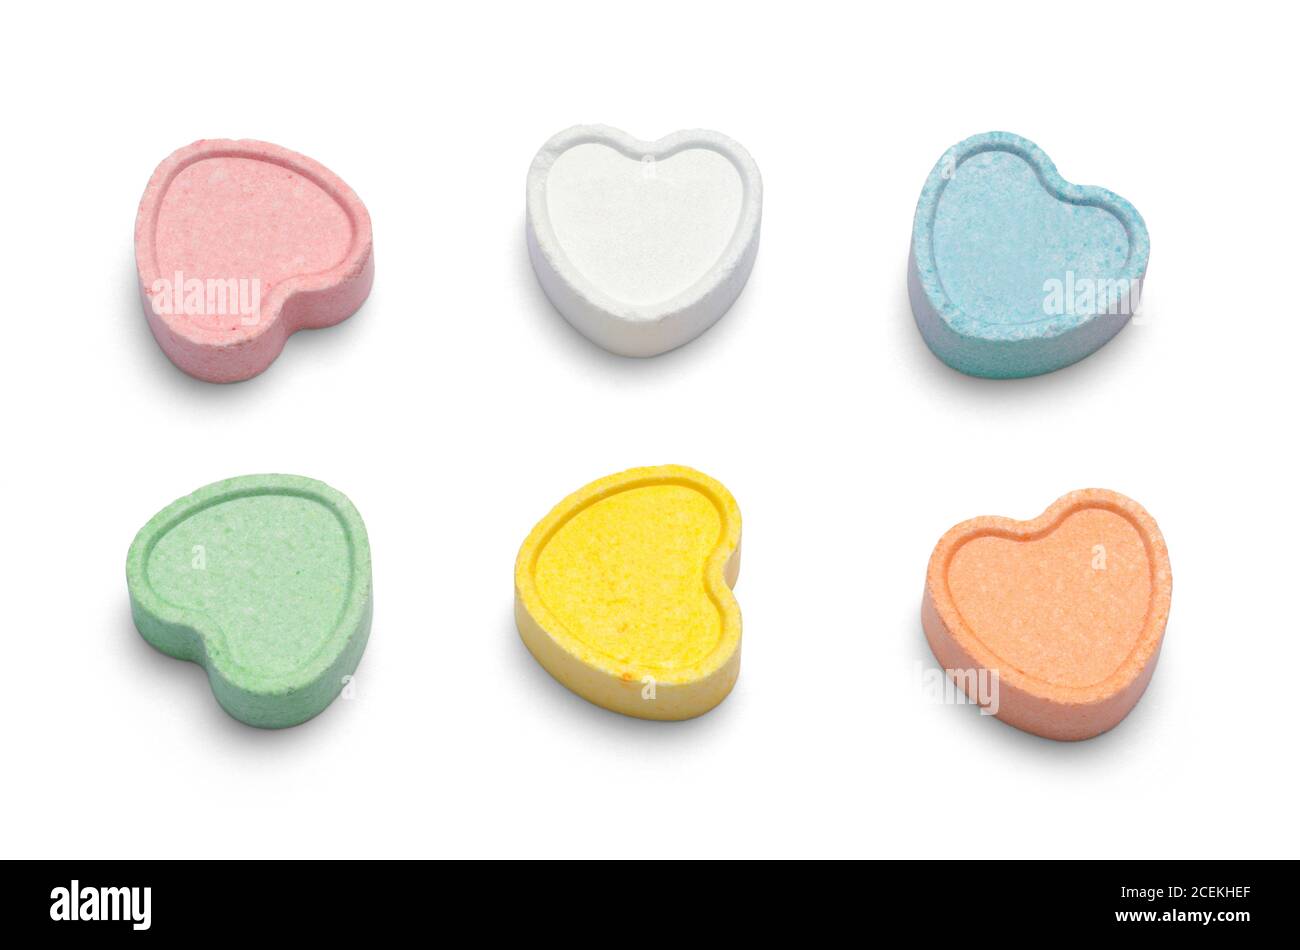 Colorful Valentines Candy Hearts Isolated on White. Stock Photo